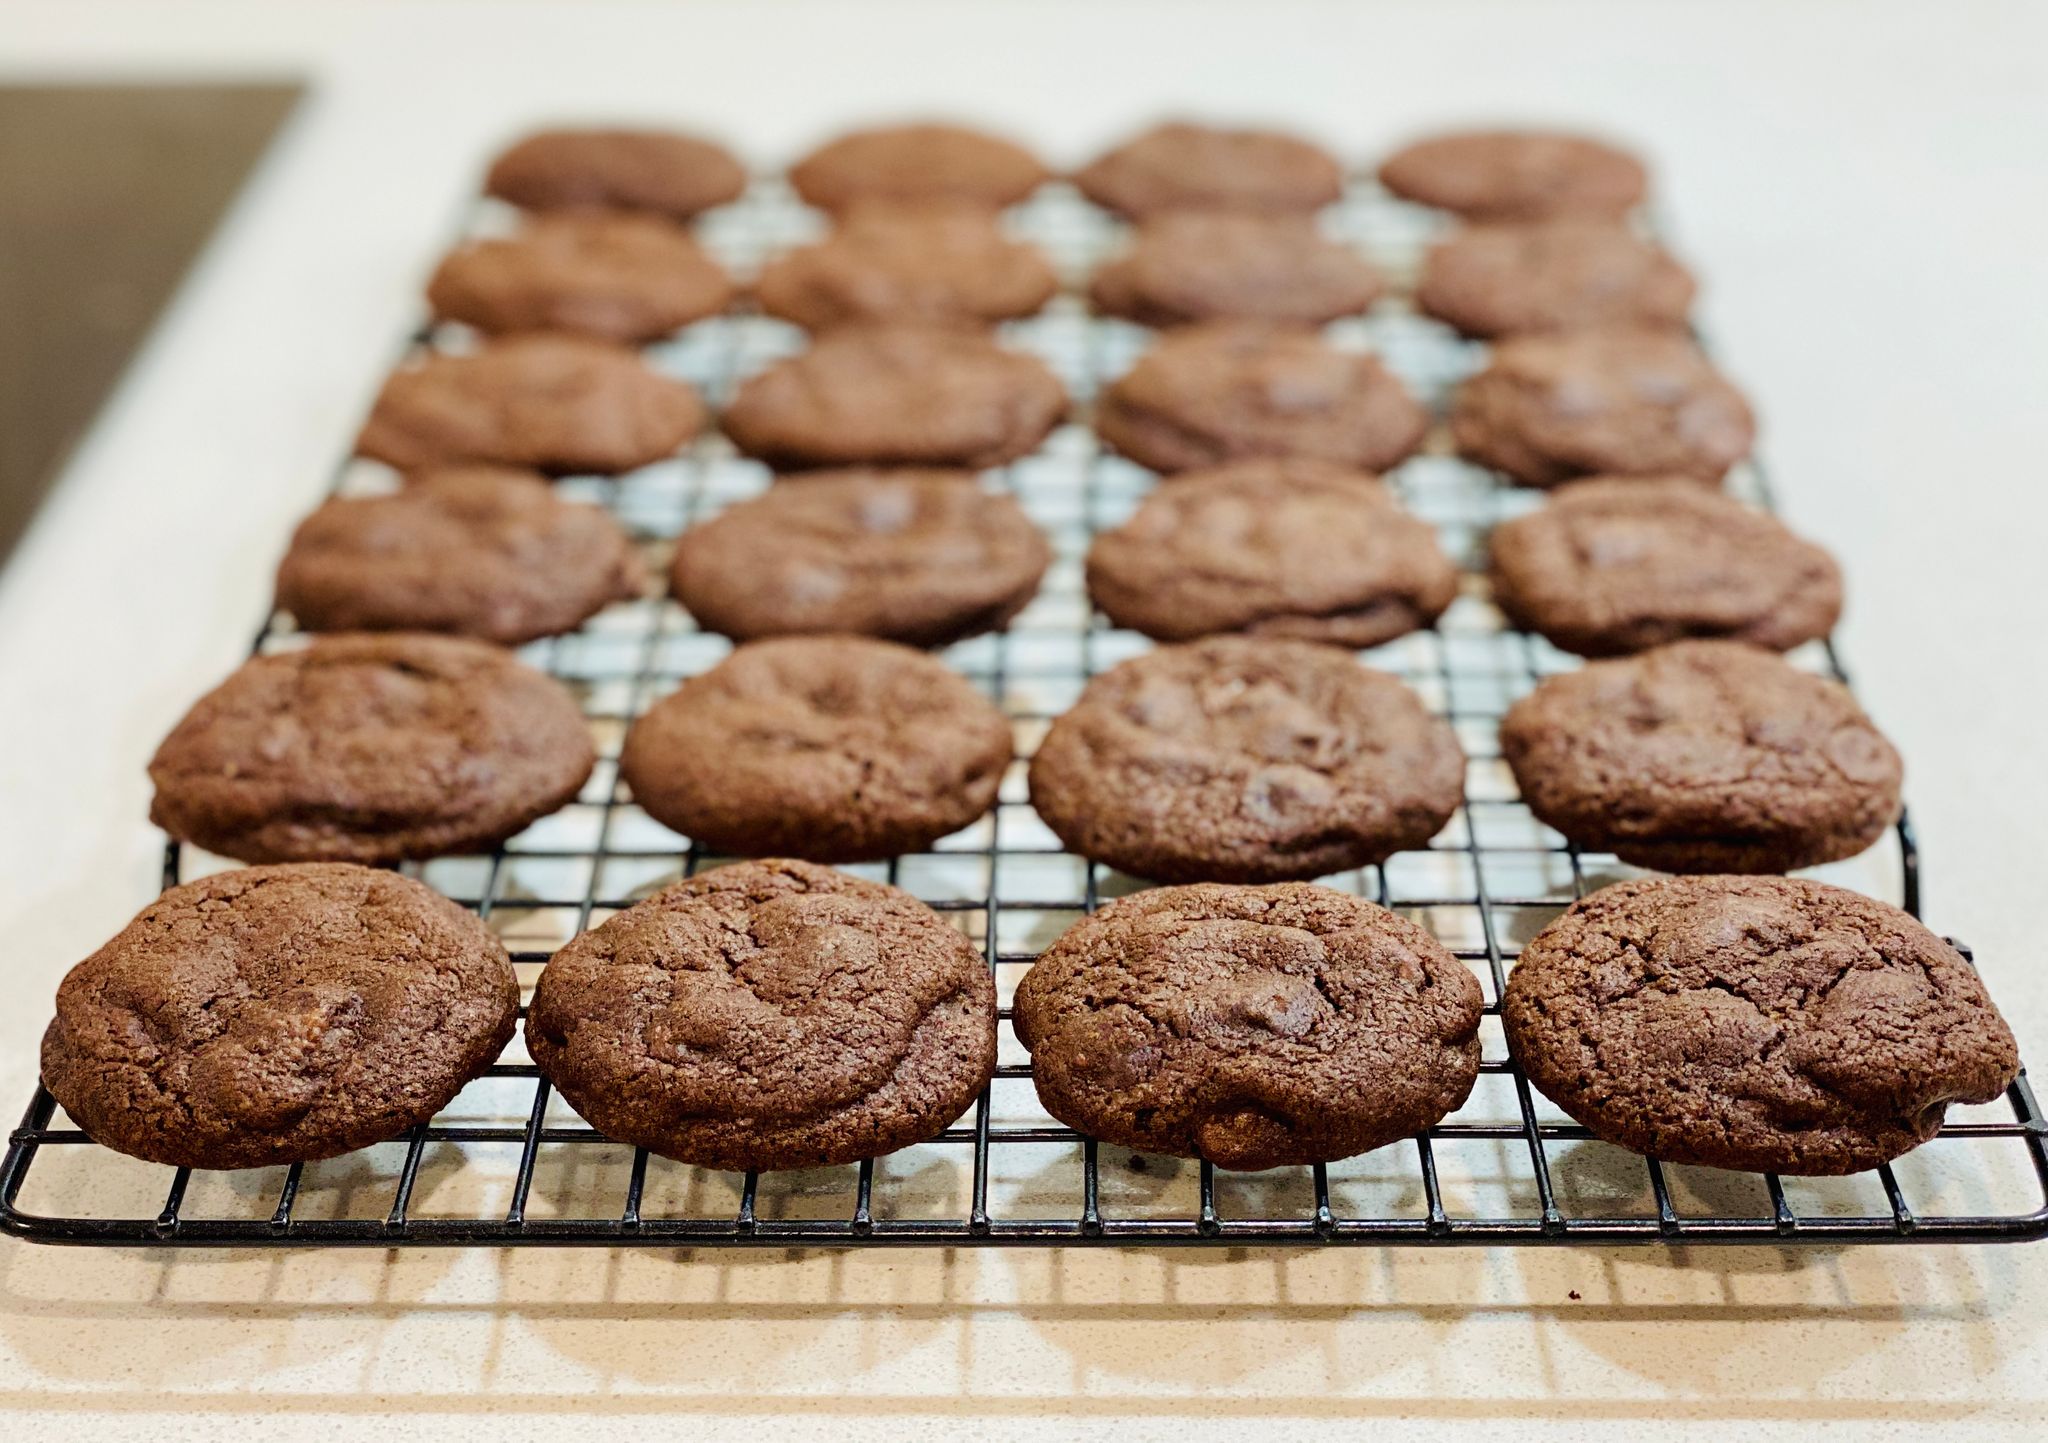 A photo of a cooling rack full of dark chocolate cookies.